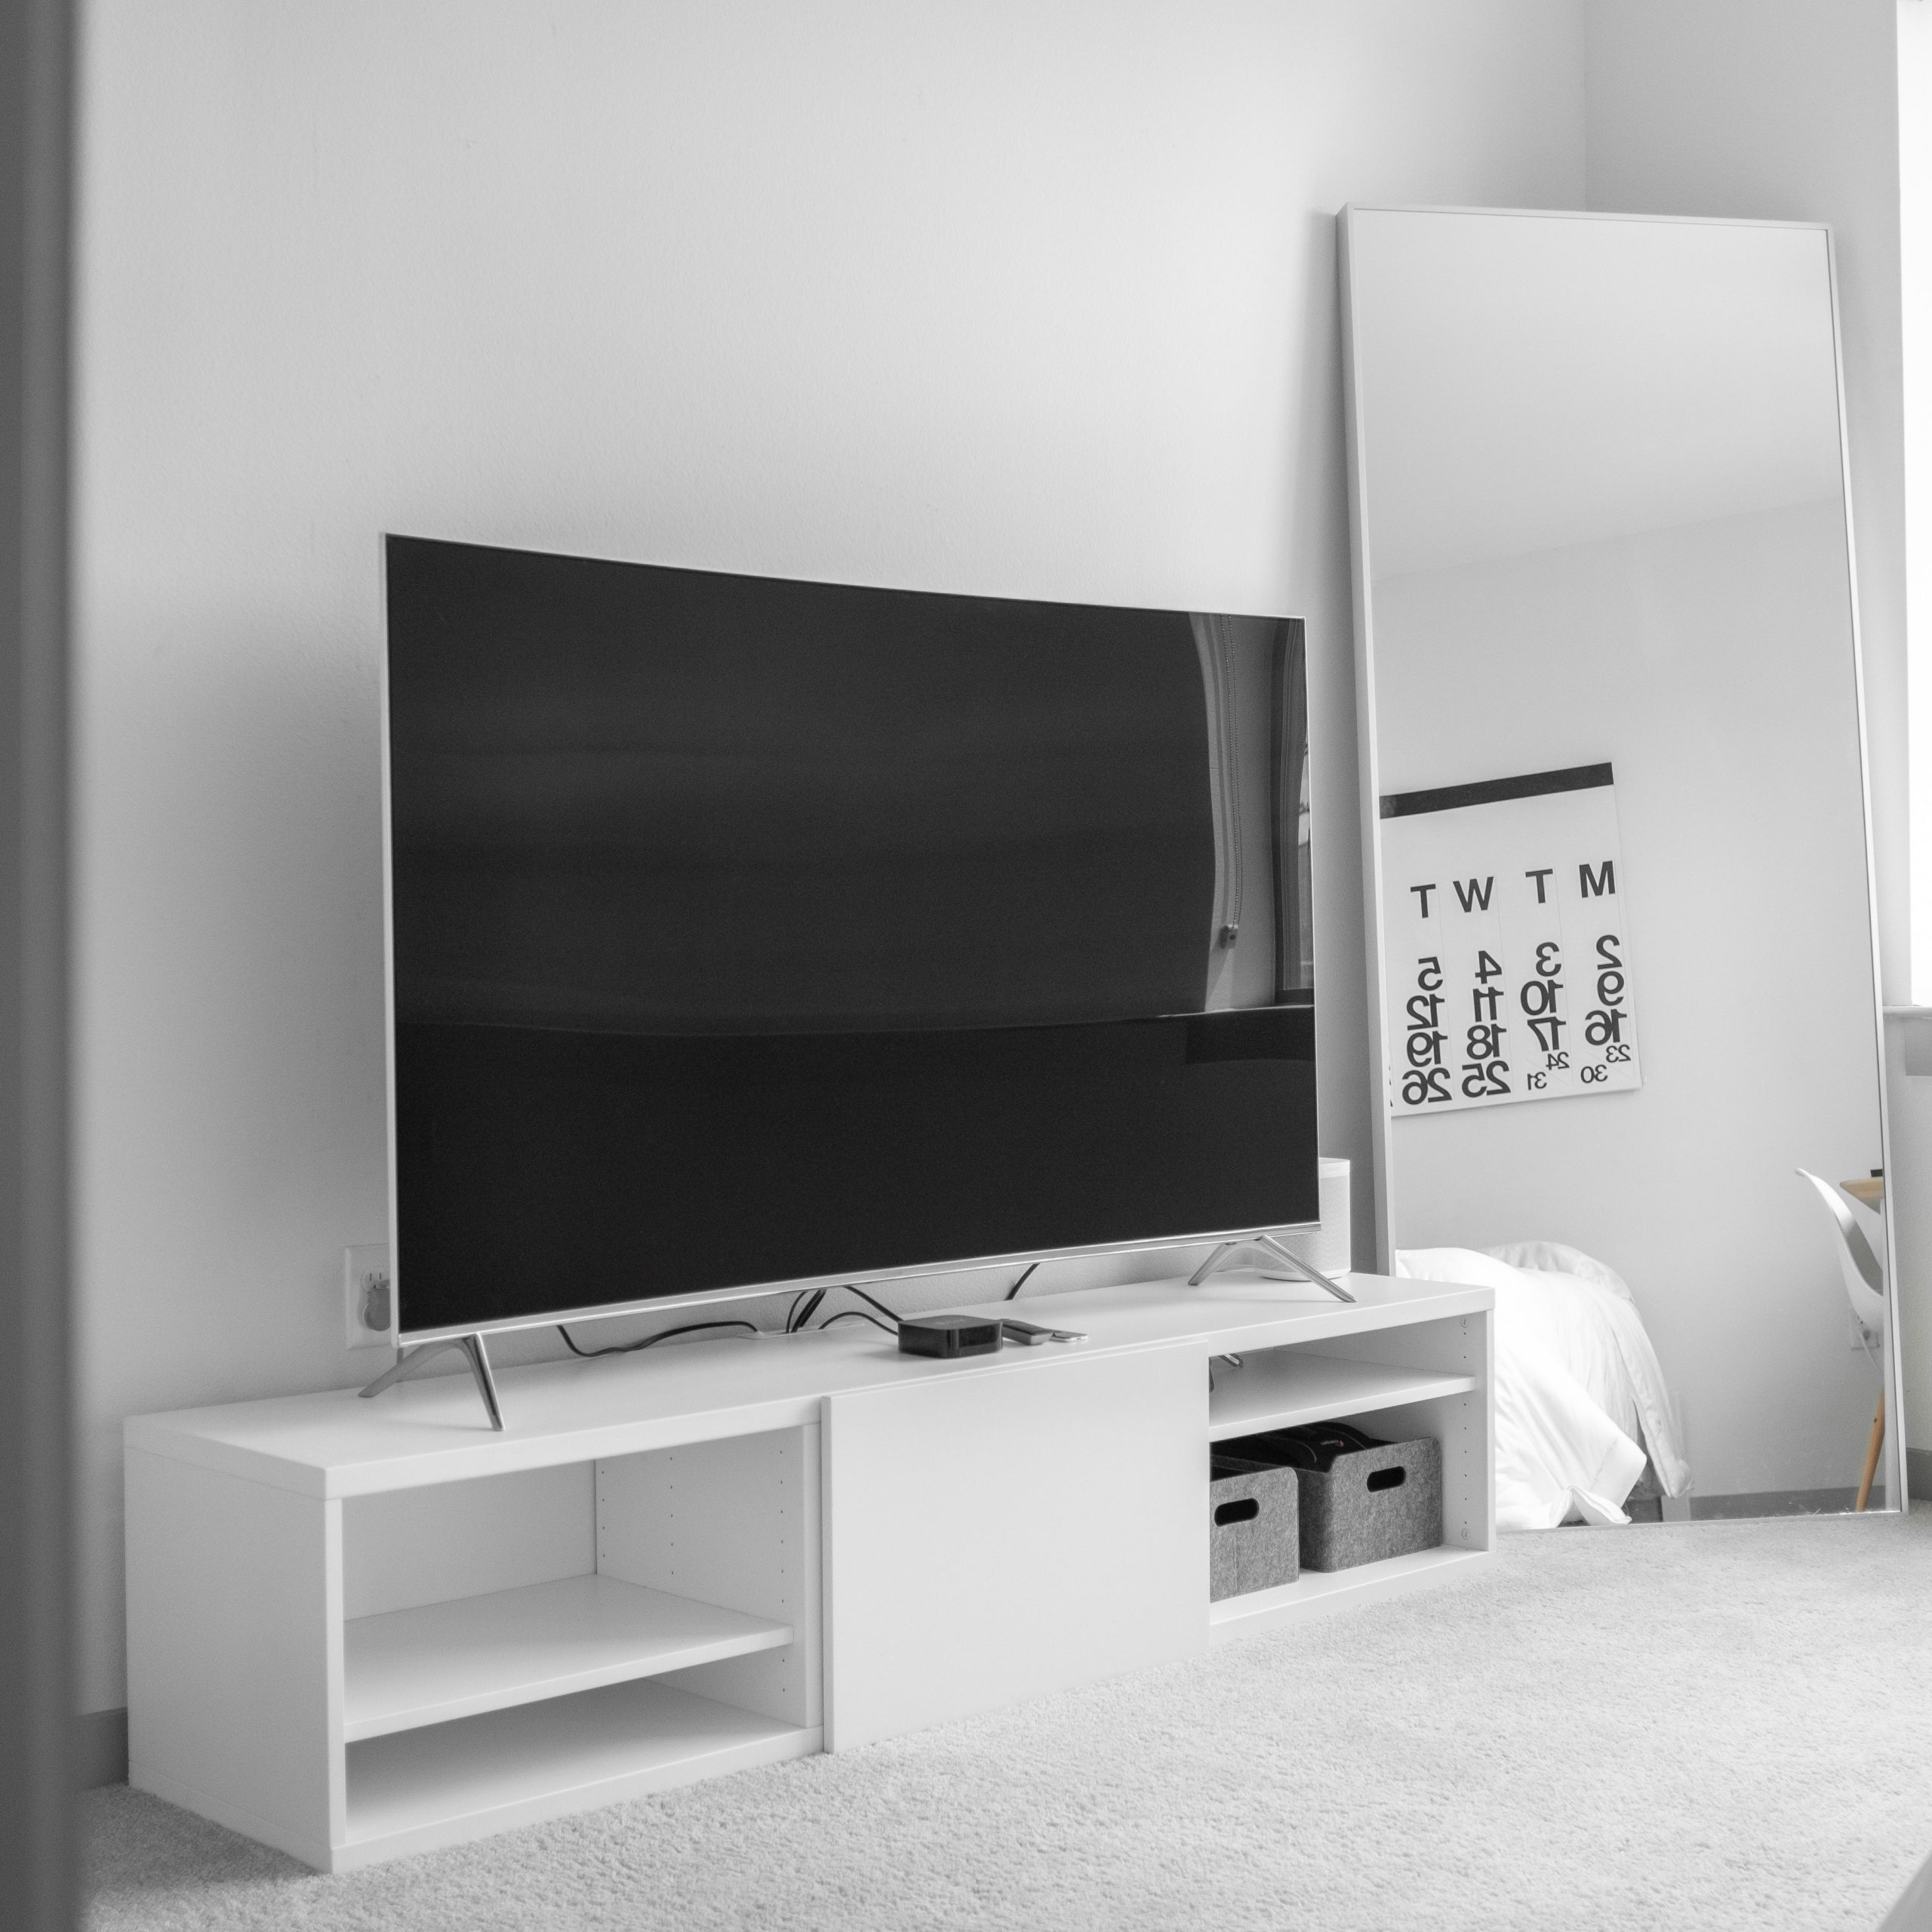  How to mount vizio tv to stand?